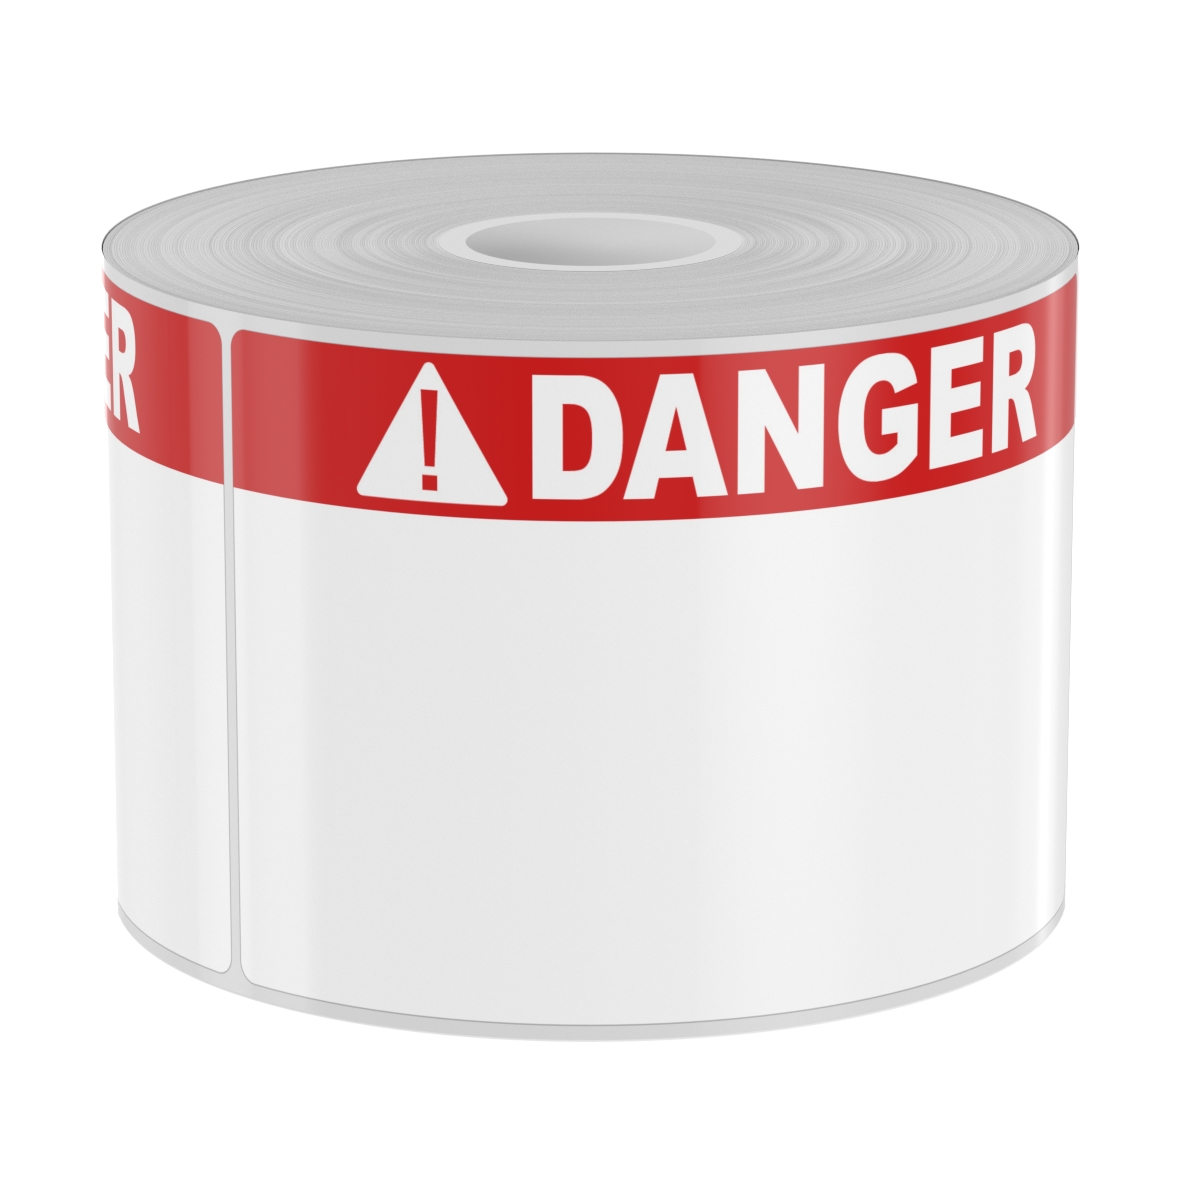 Detail view for 250 3" x 5" High-Performance Die-Cut Red Band Danger